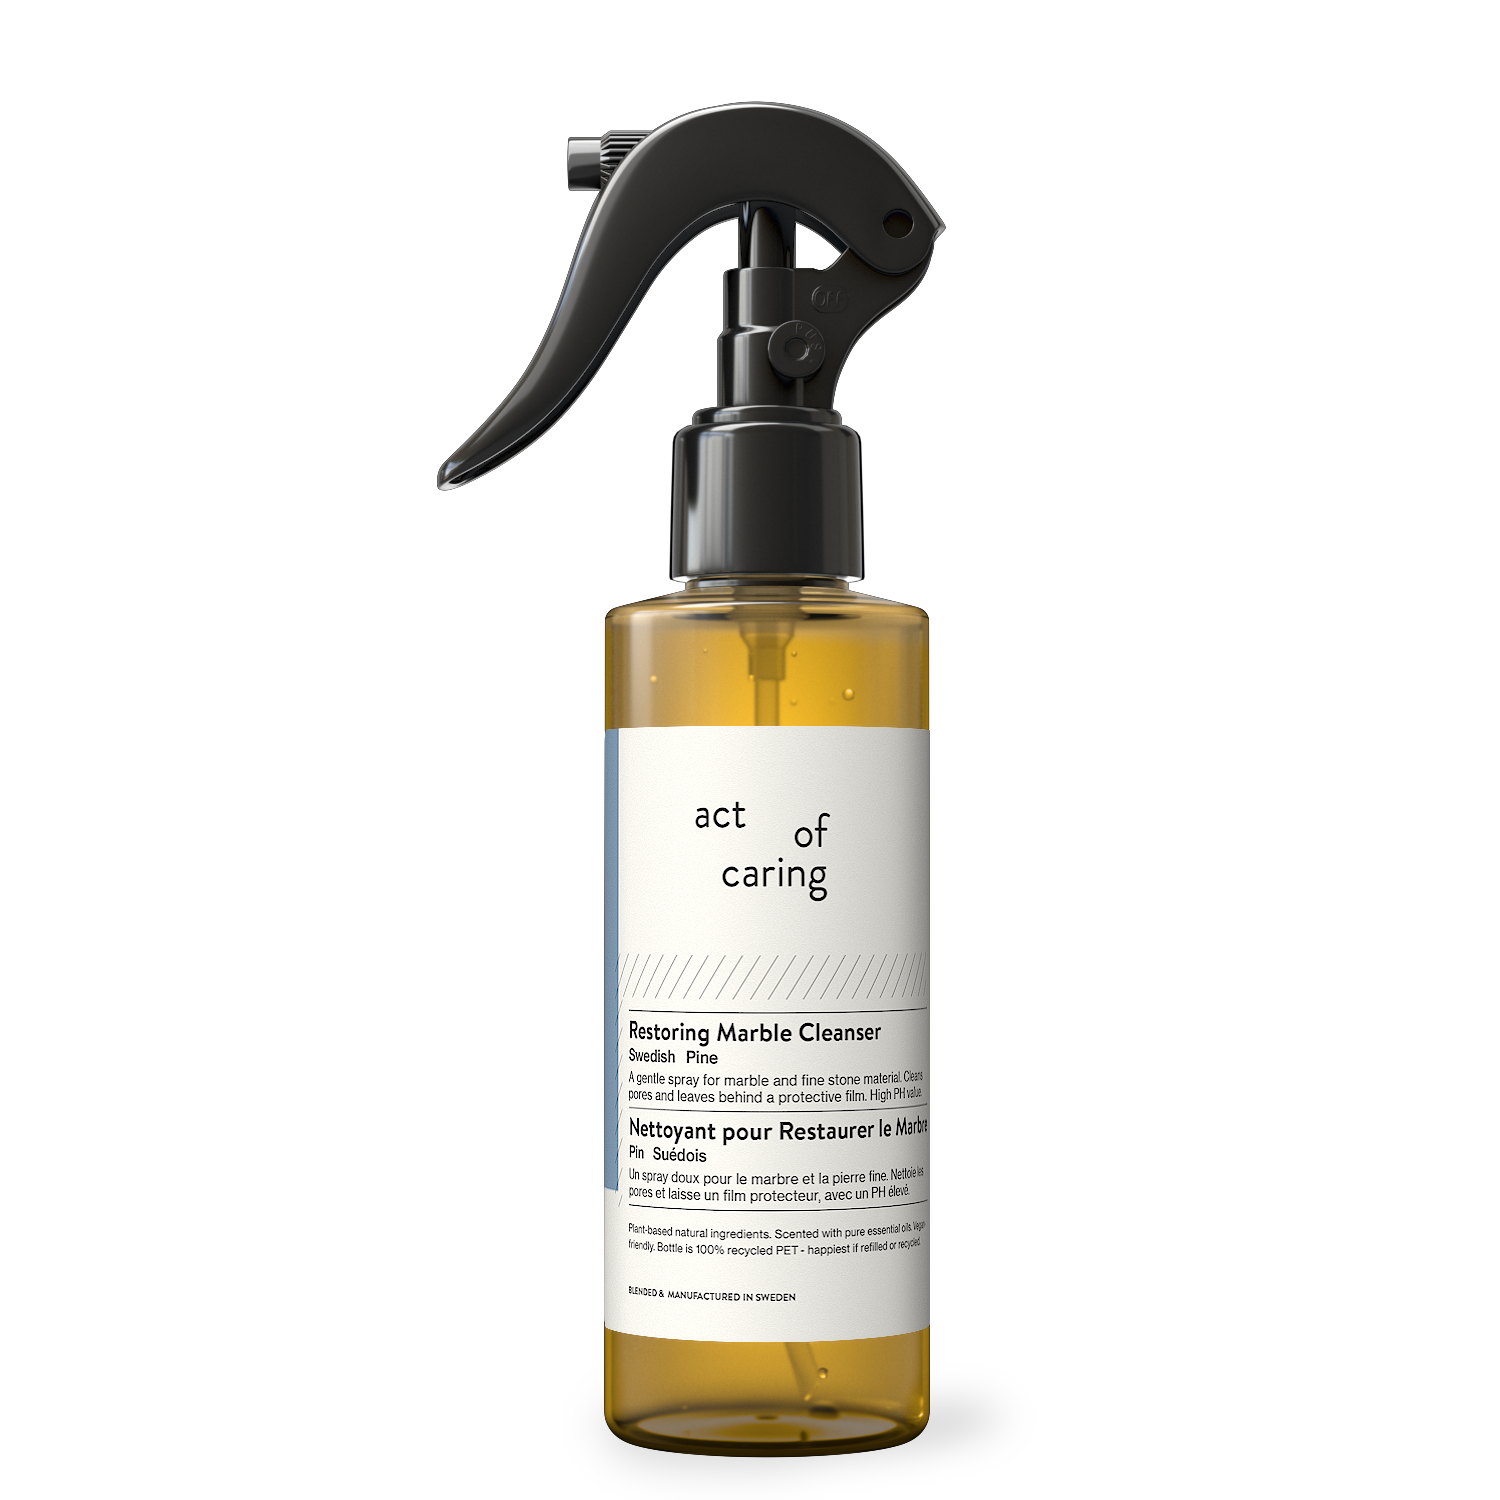 ACT OF CARING - Restoring Marble Cleanser